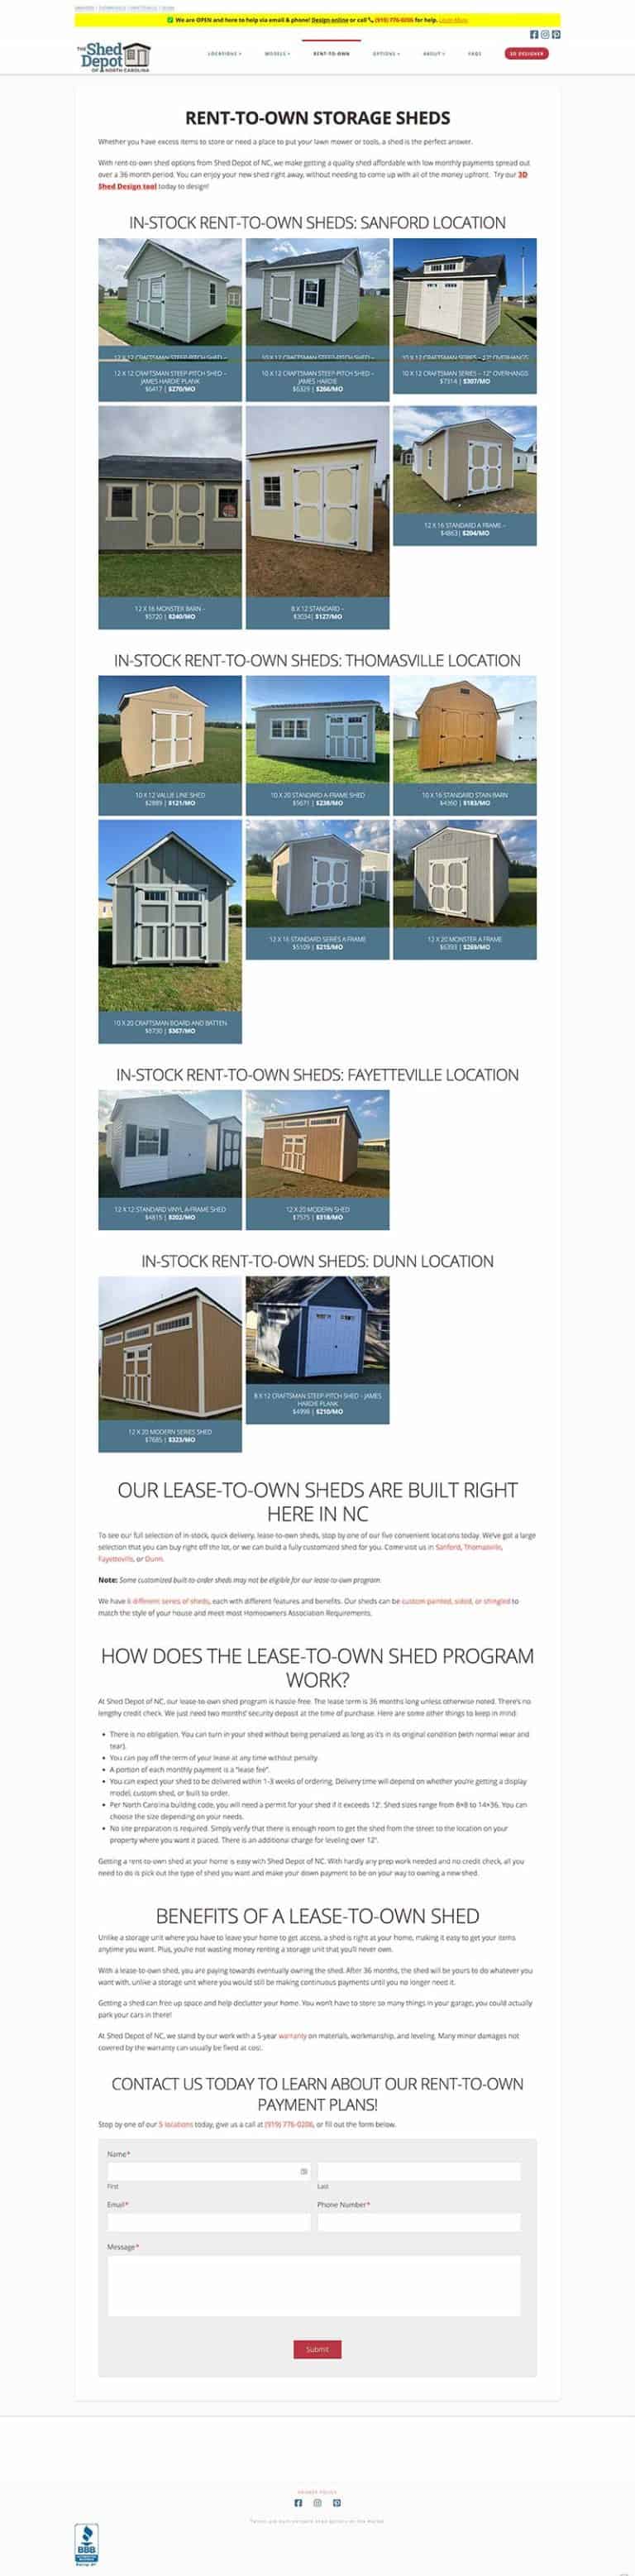 Responsive WordPress Design for a Shed Building Company